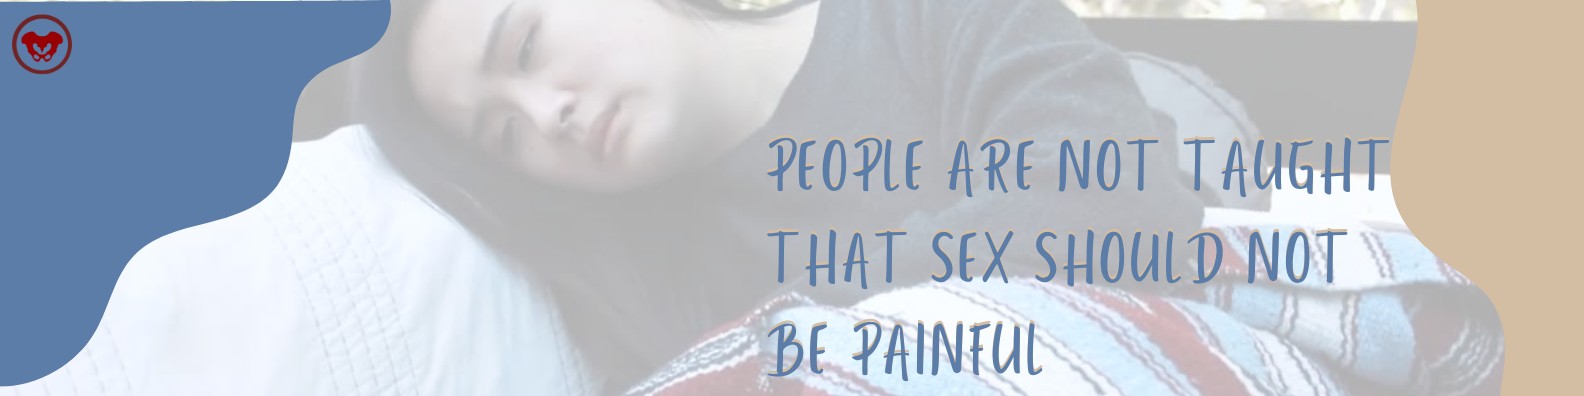 People Are Not Taught That Sex Should Not Be Painful